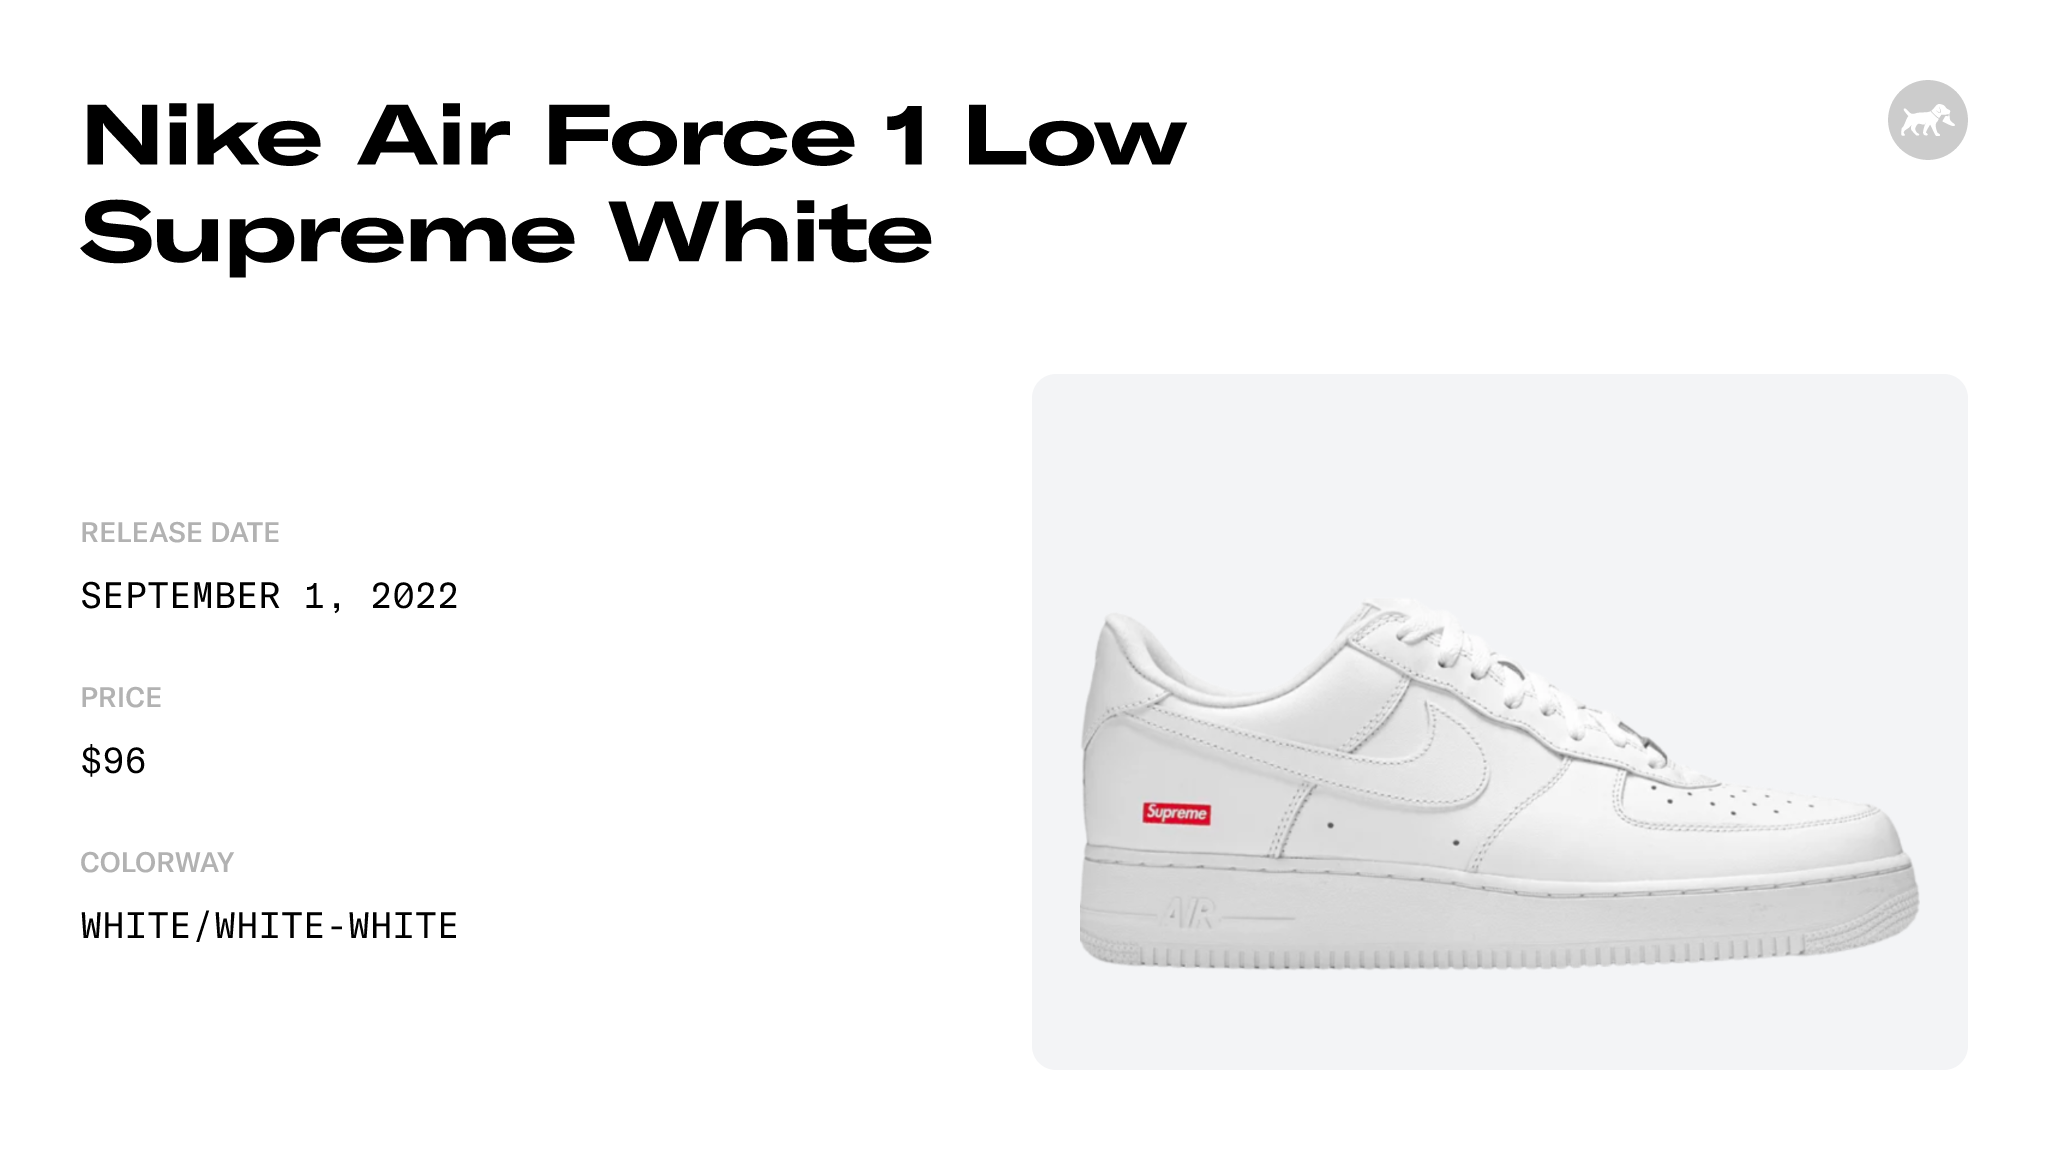 Nike Air Force 1 Low Supreme White - CU9225-100 Raffles and Release Date